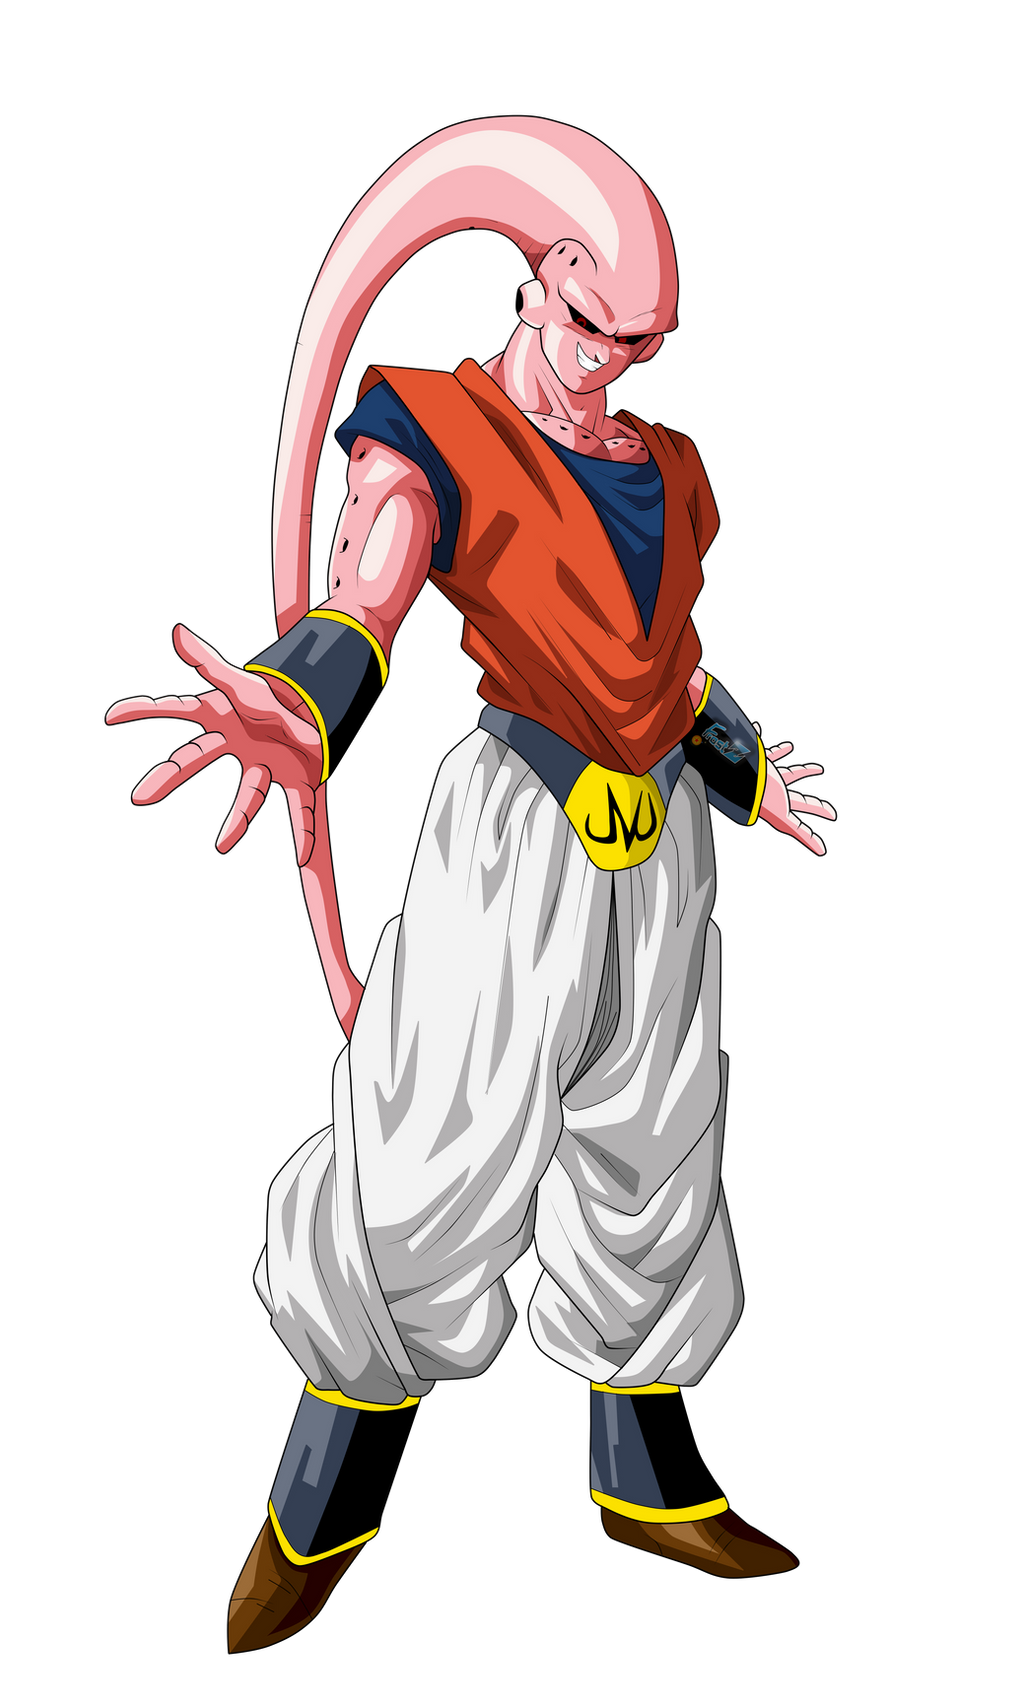 Download Join the Adventure with Buu Saga! Wallpaper